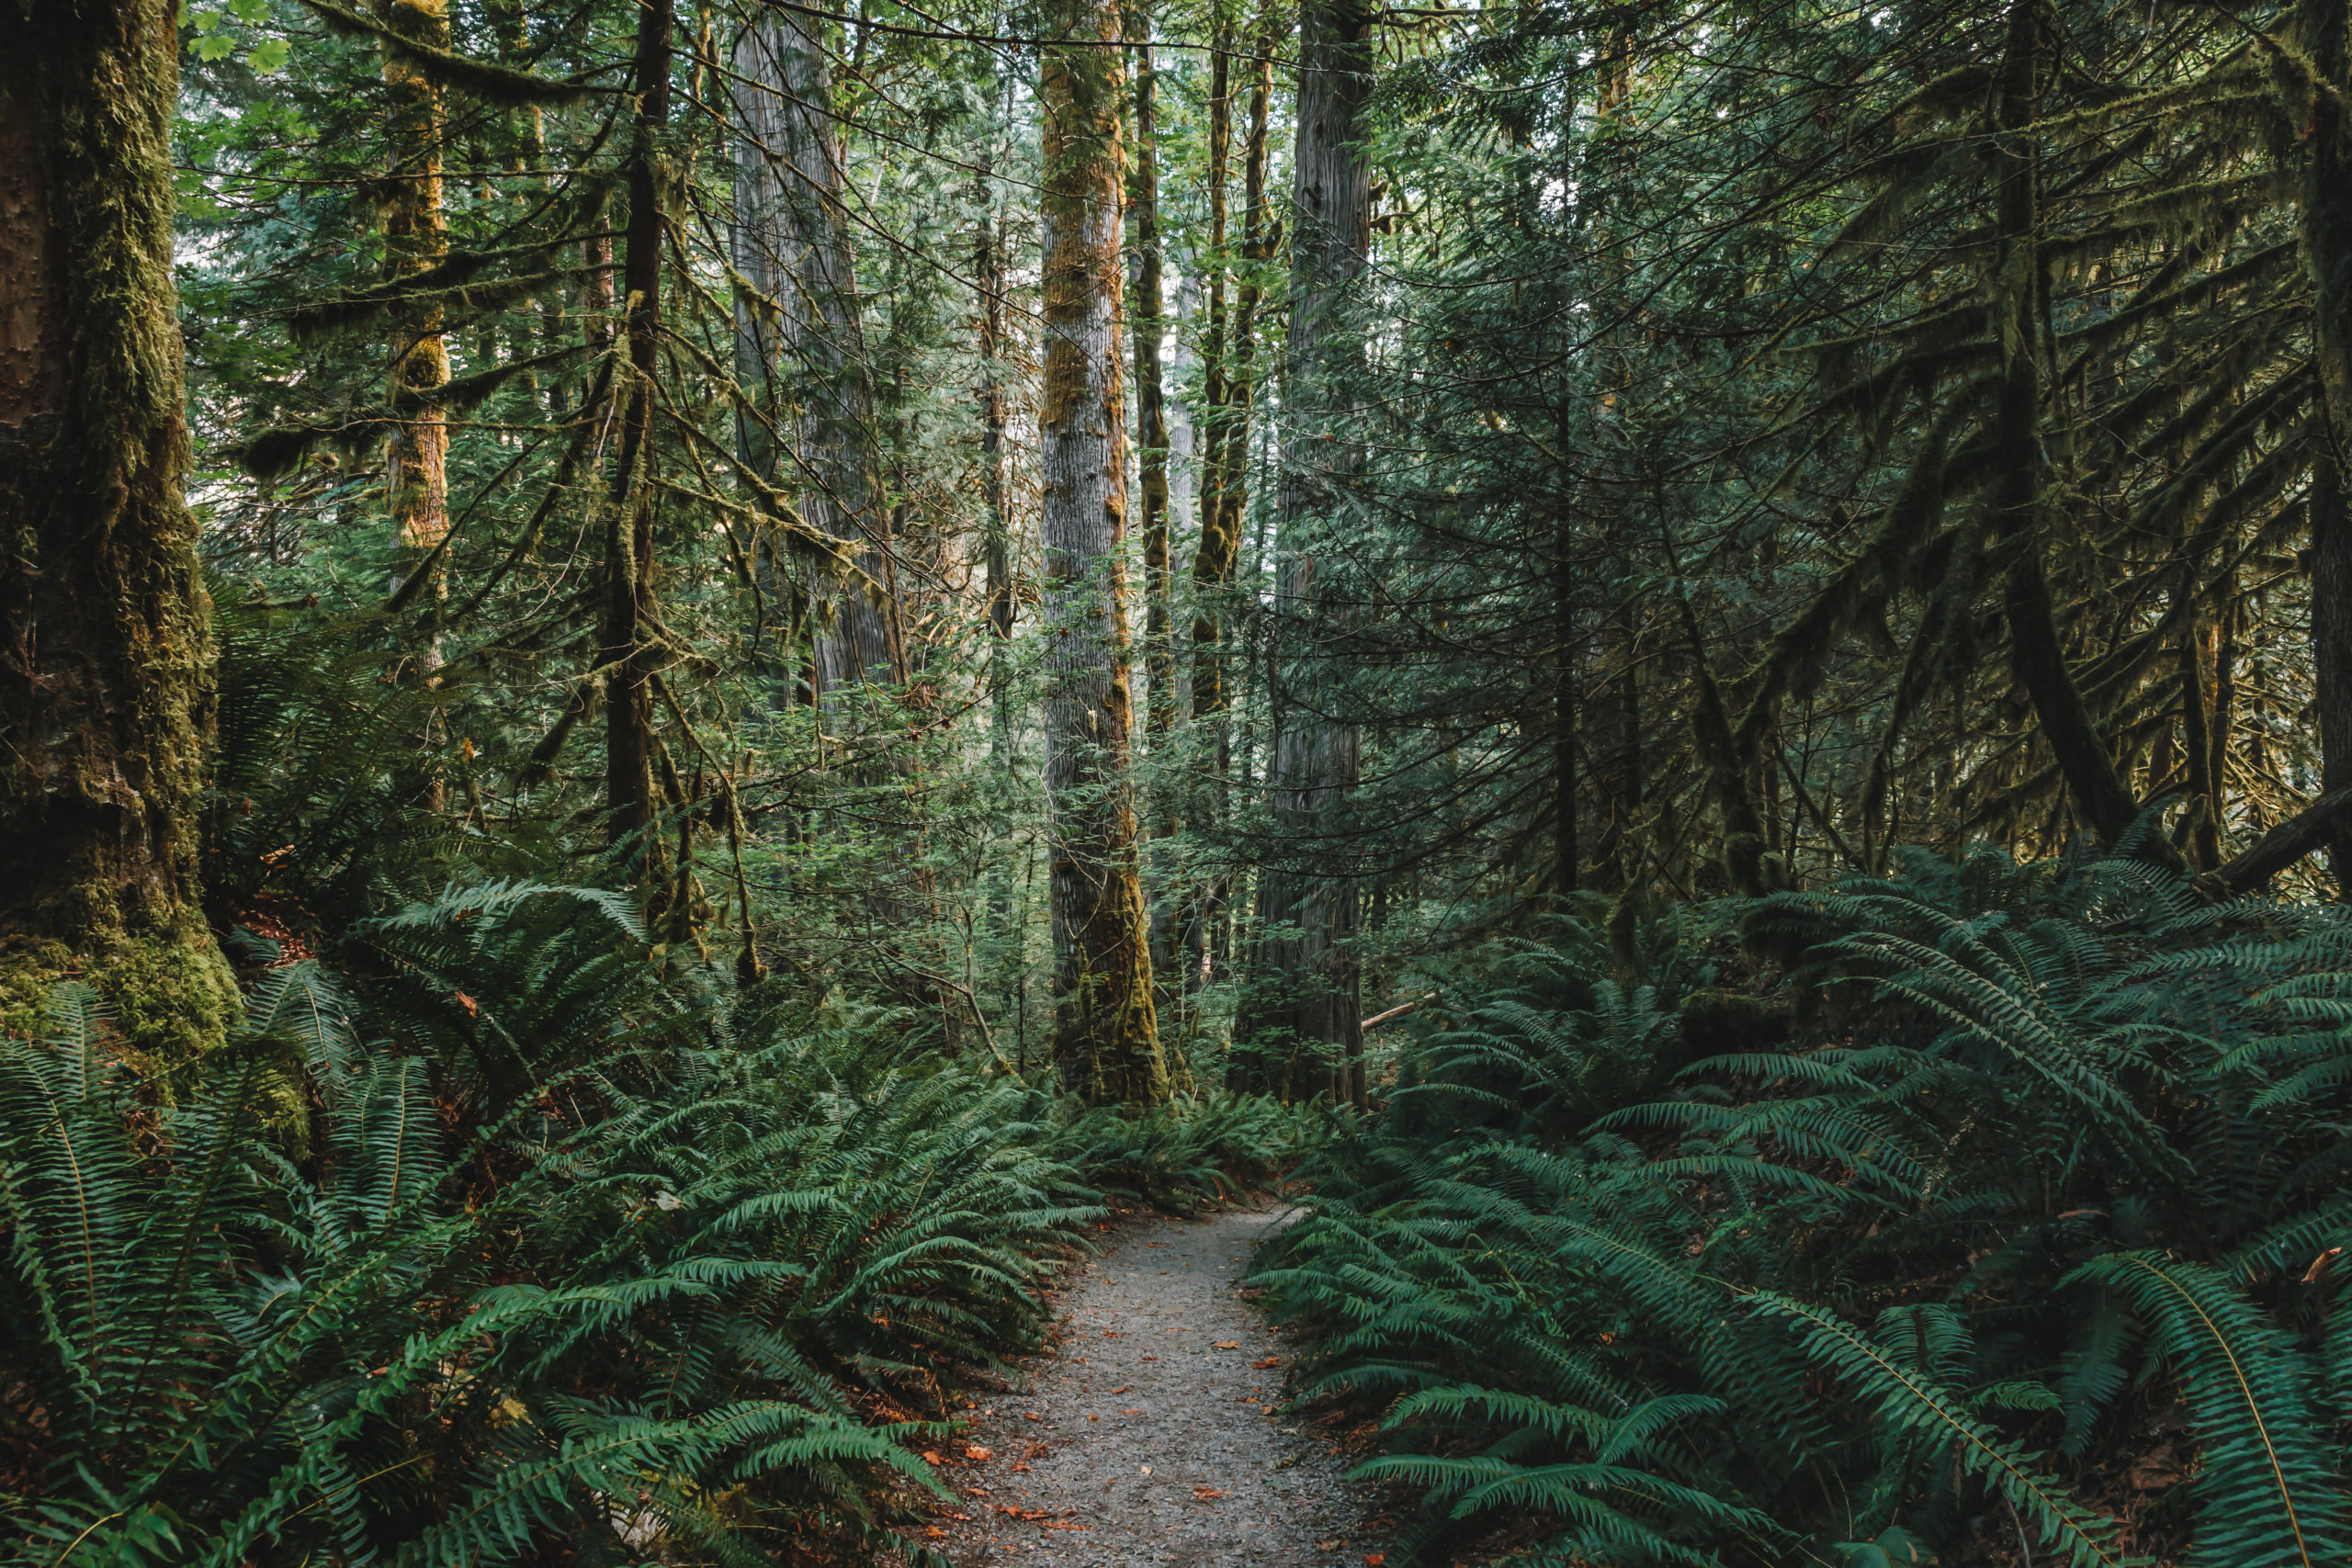 A rocky path, Trail of the Cedars, leads through the giant ferns and giant mossy cedar trees through a forest in North Cascades National Park, Washington state, USA.